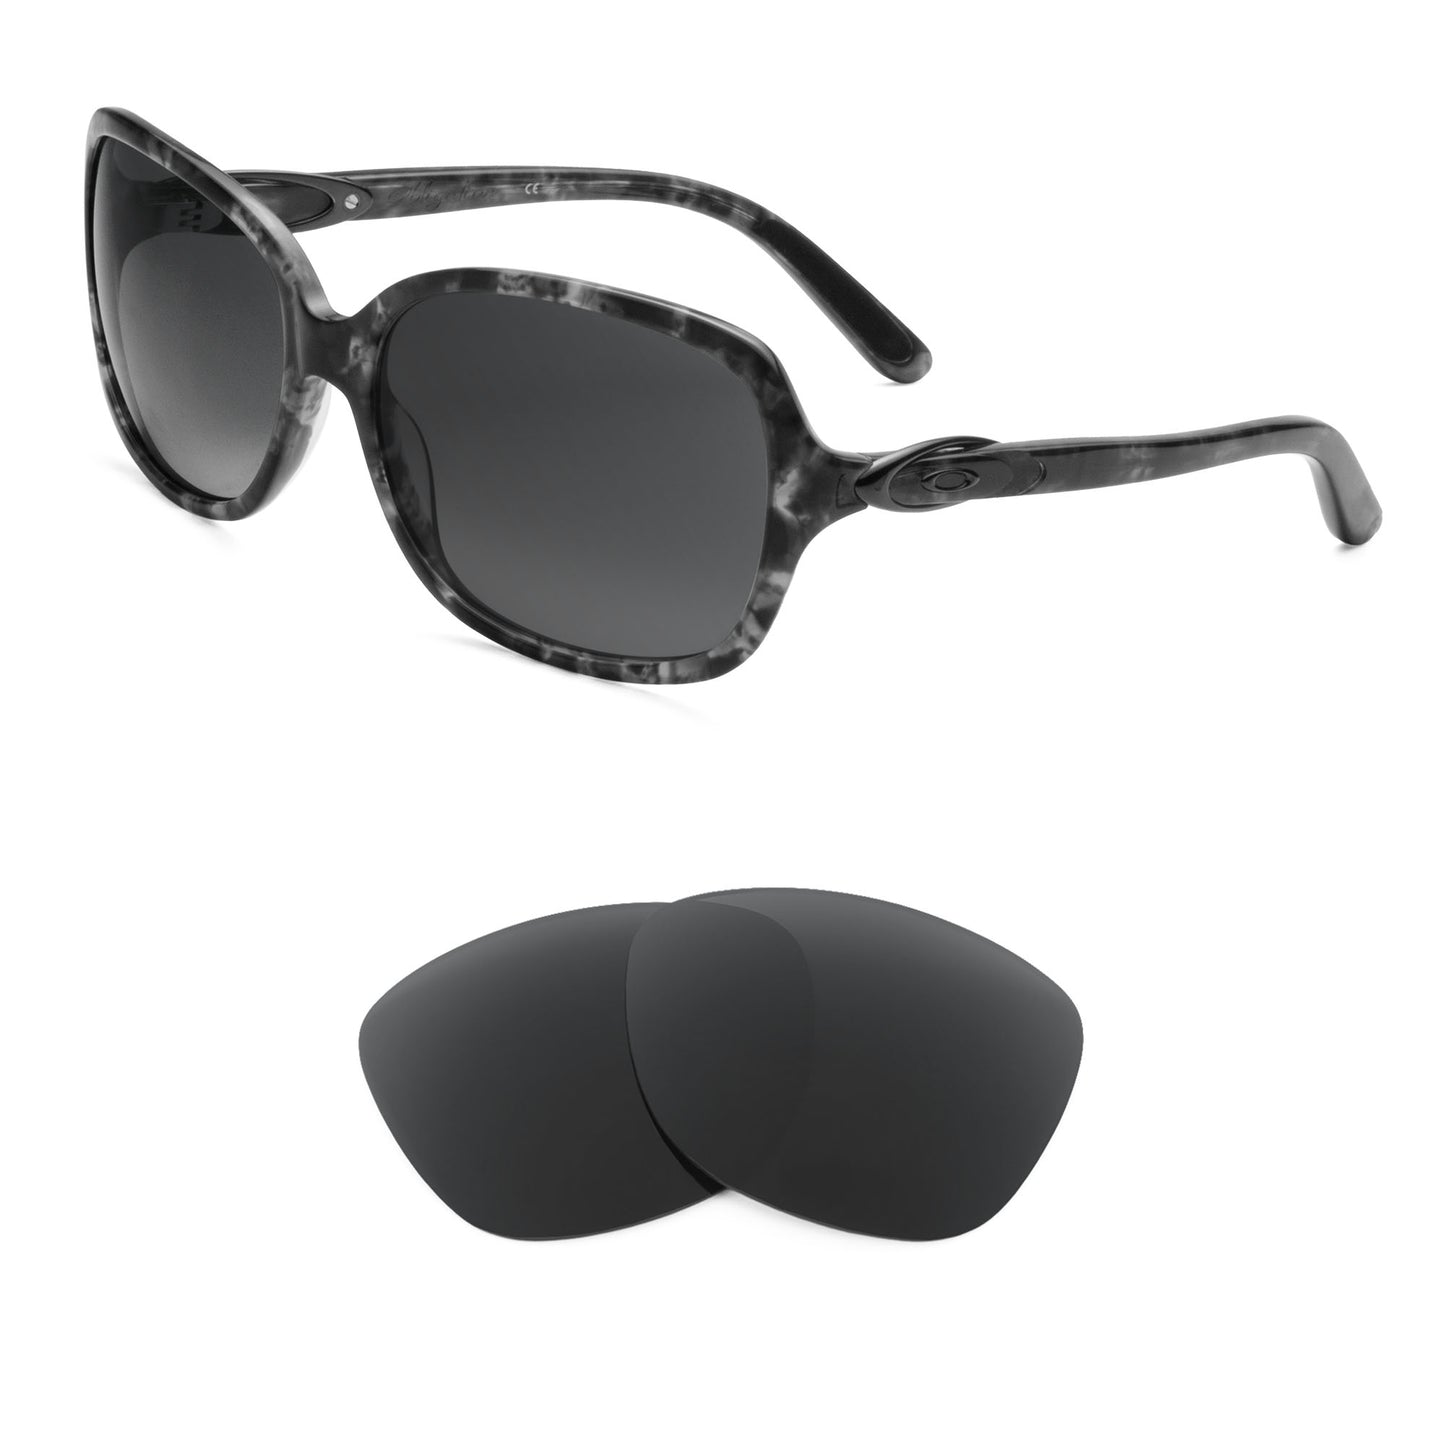 Oakley Obligation sunglasses with replacement lenses